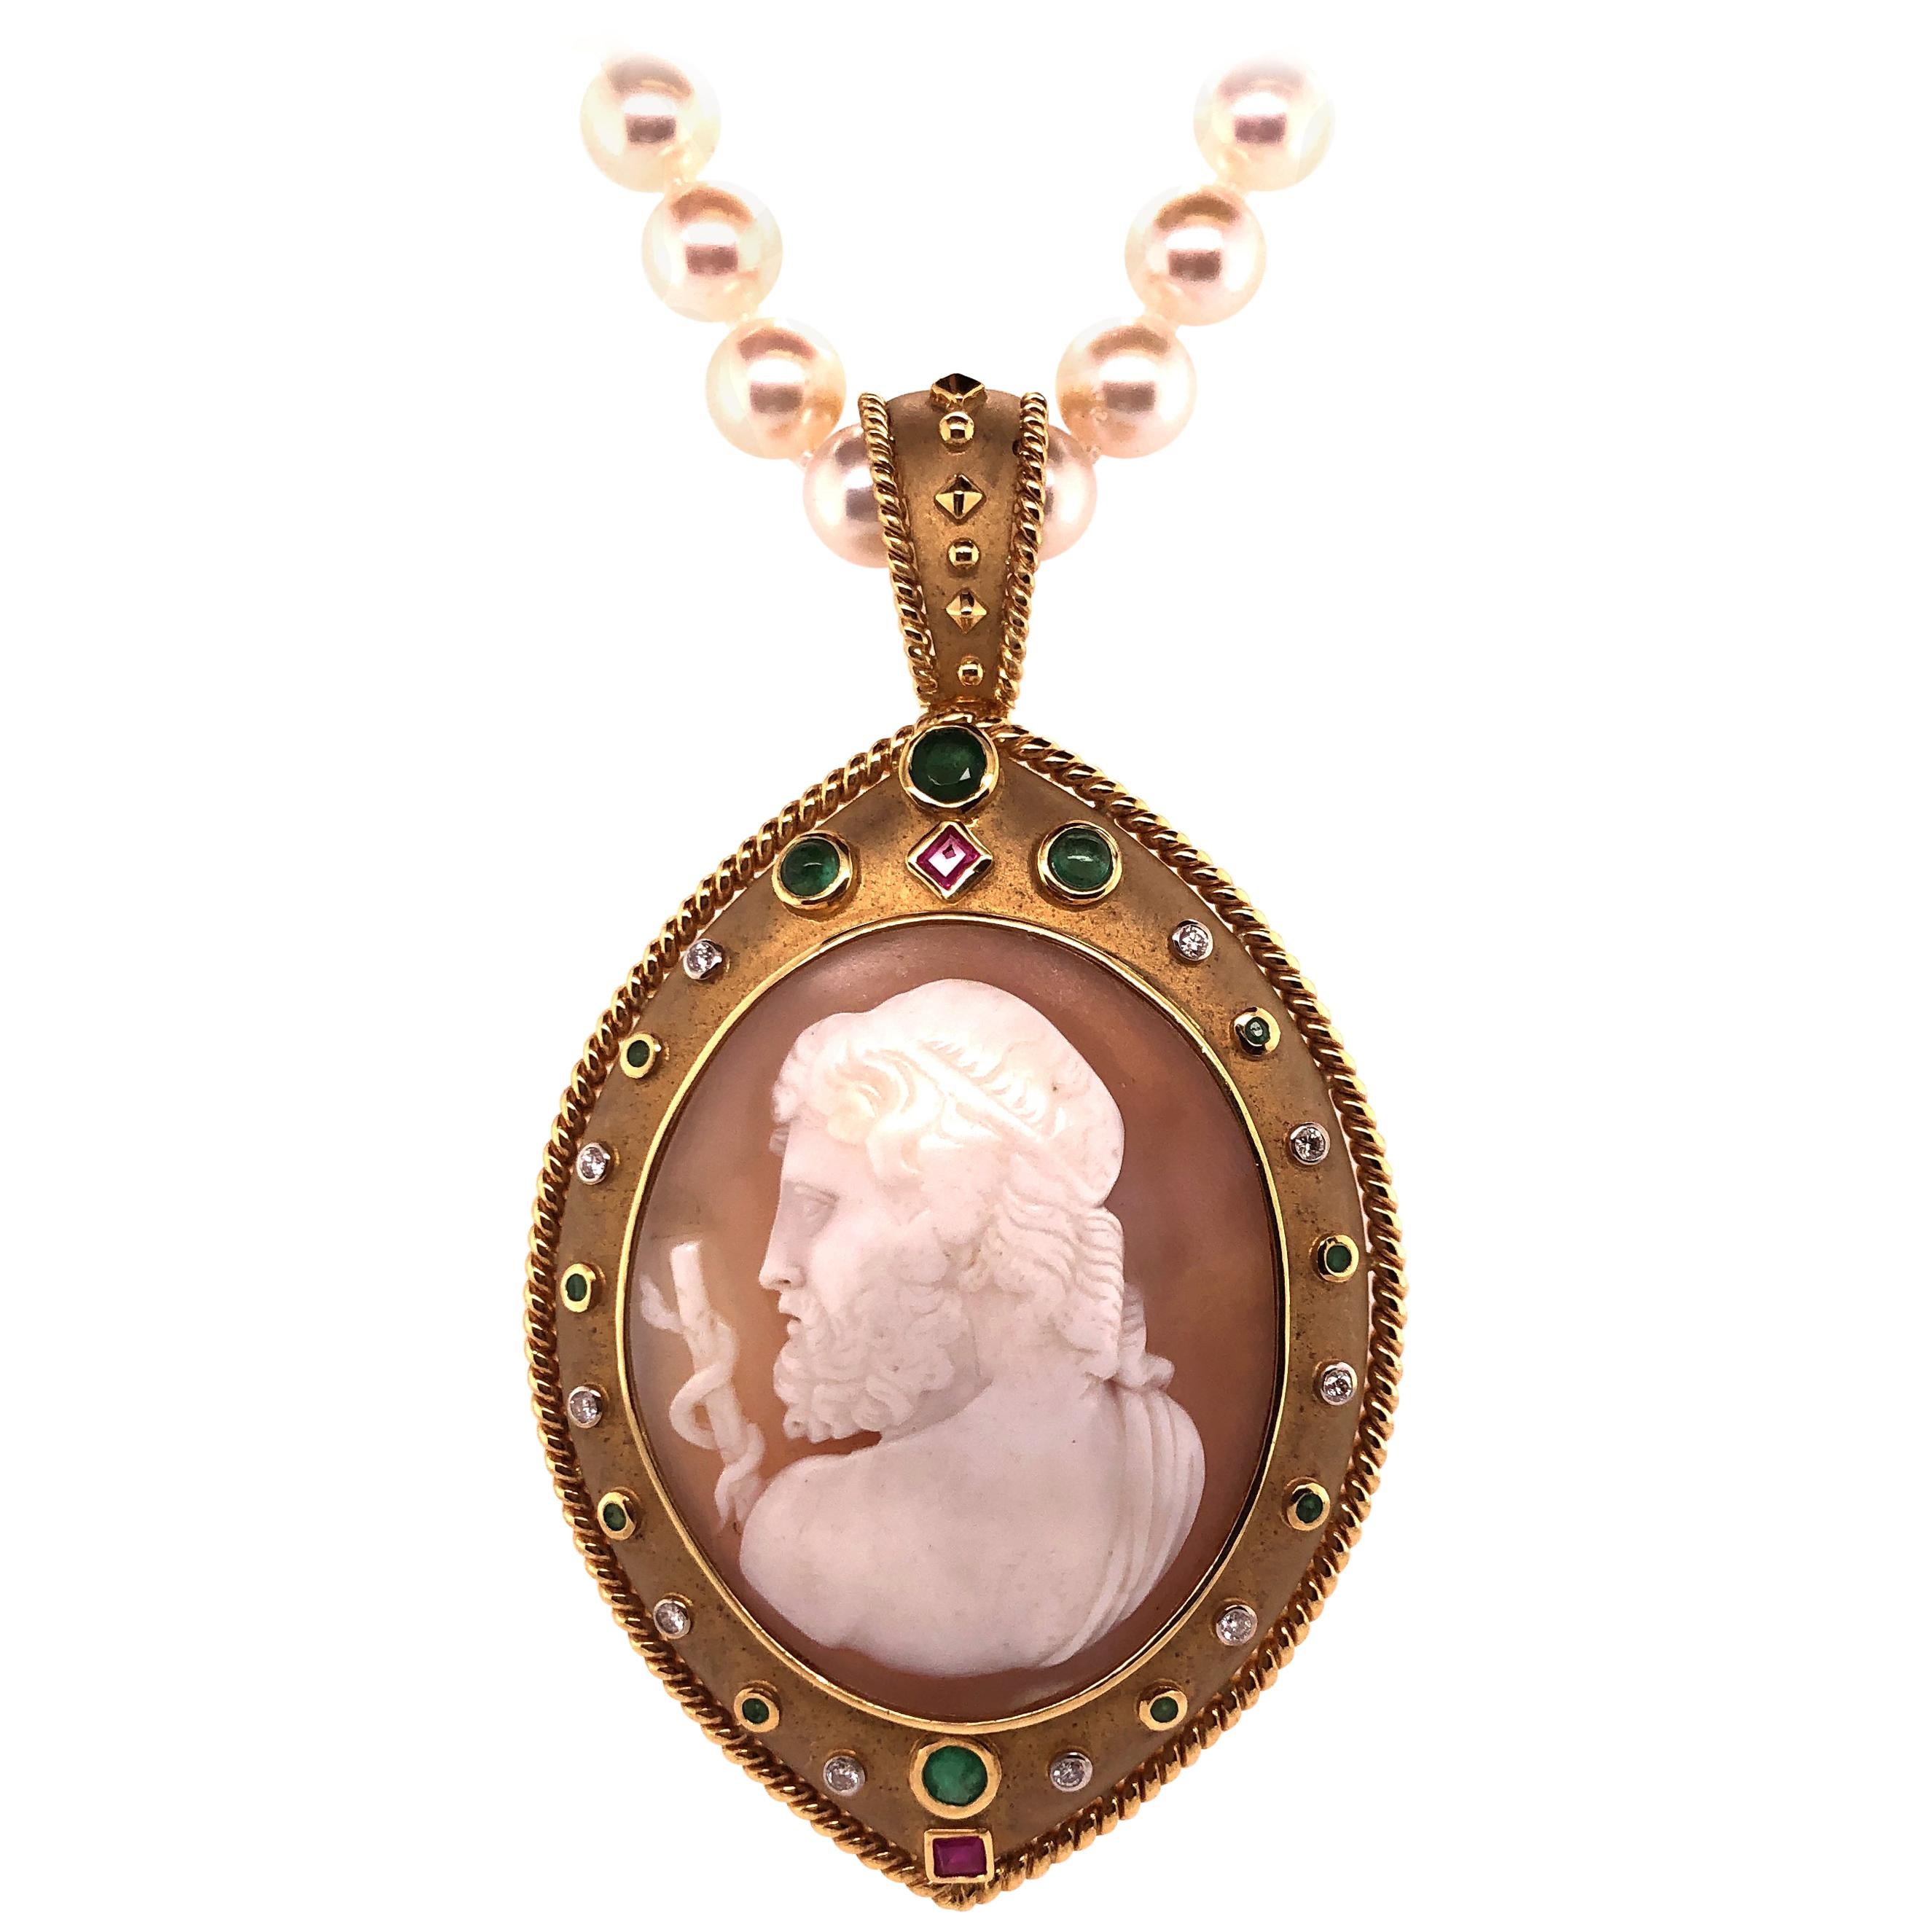 Yellow Gold Precious Stone Cameo Pendant on Pearl Necklace